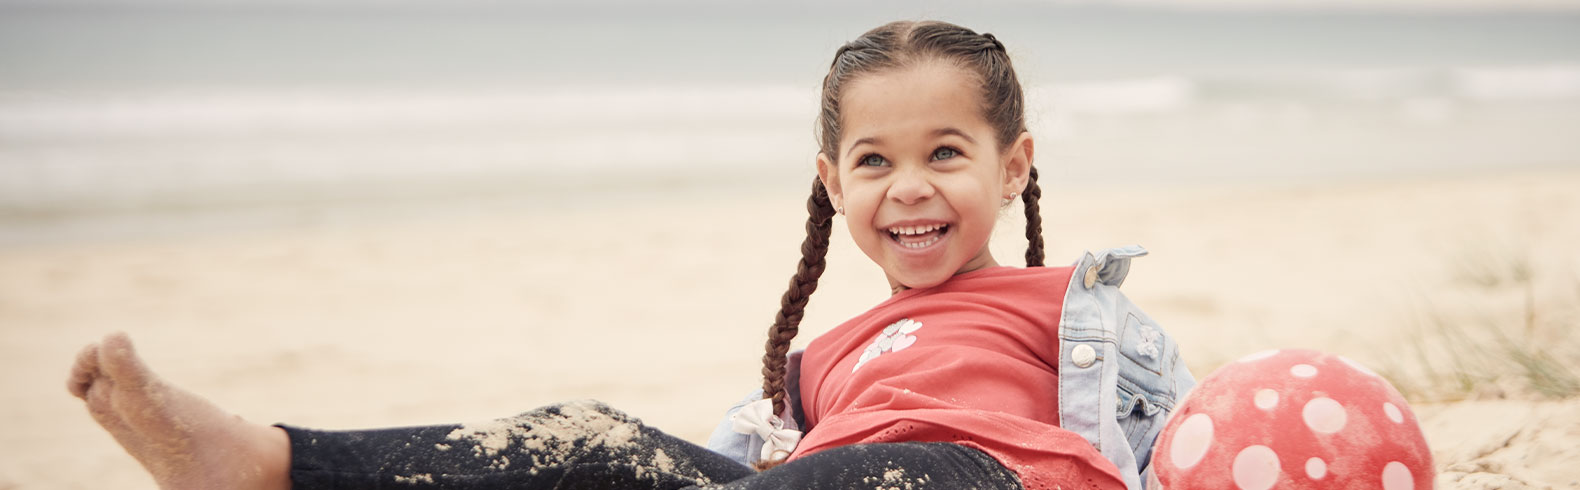 a child sitting in the sand on a beach smiling, next to her is a red beach ball